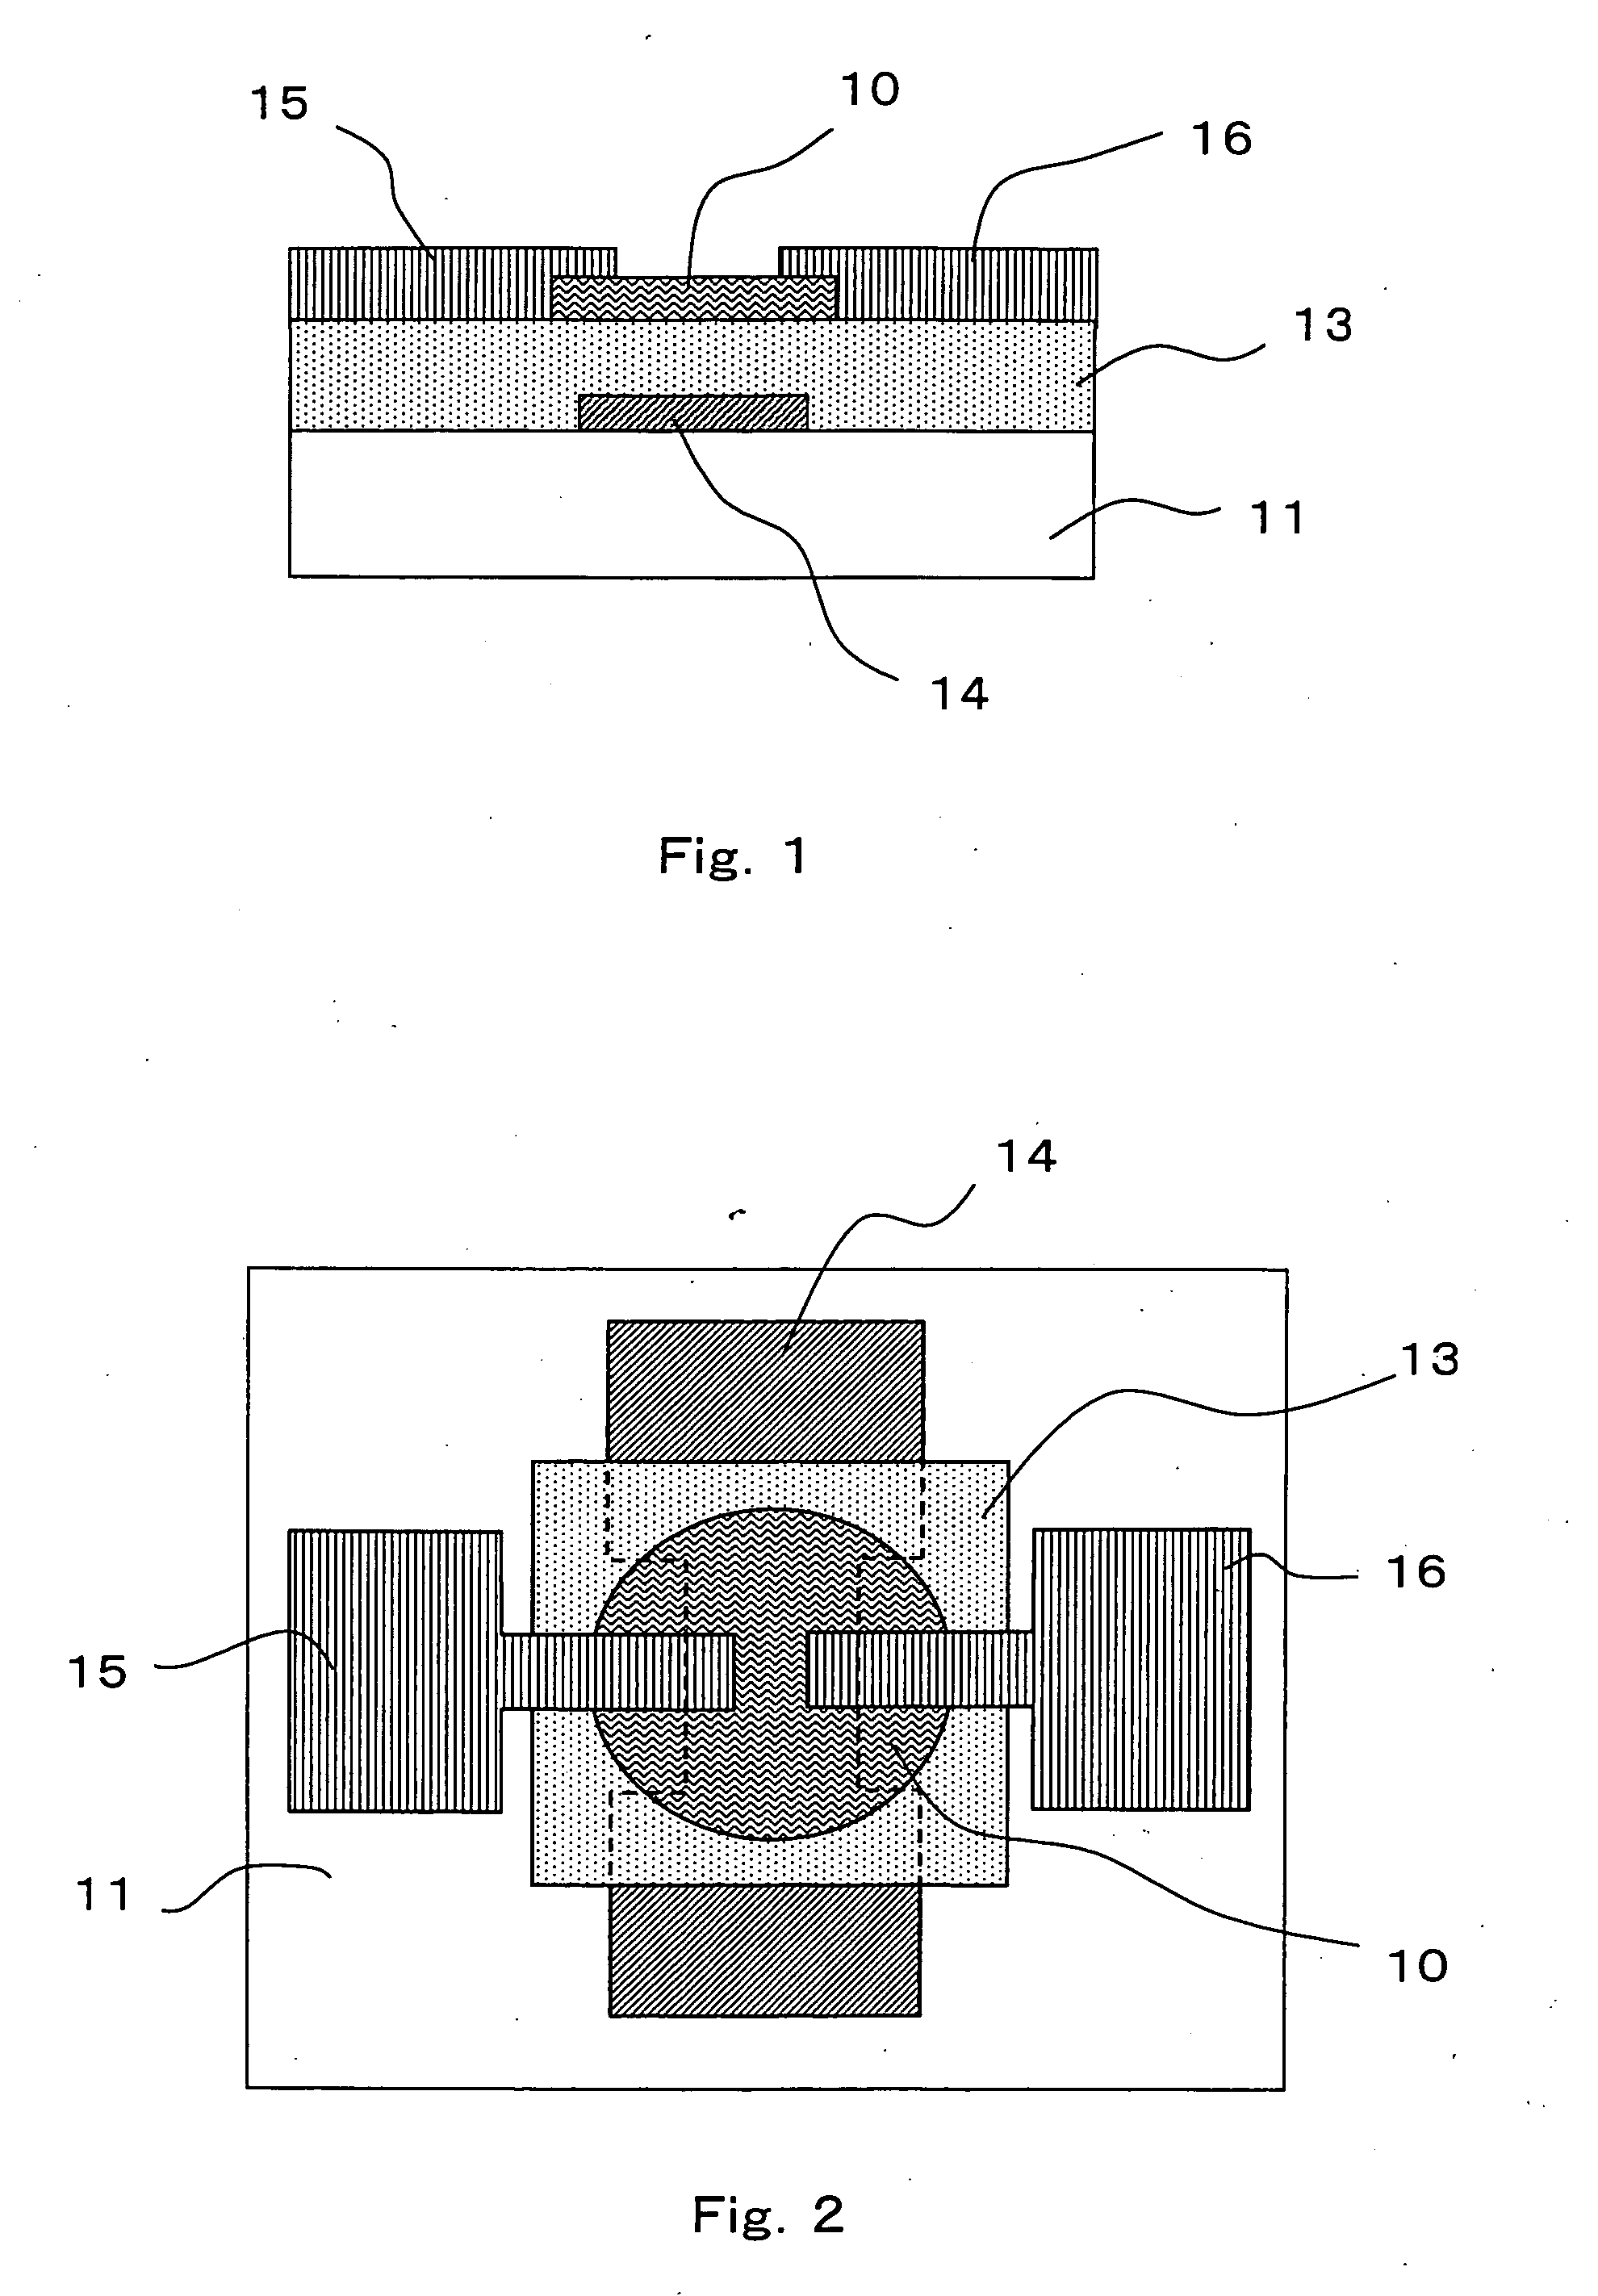 Electroric device, integrated circuit, and method of manufacturing the same